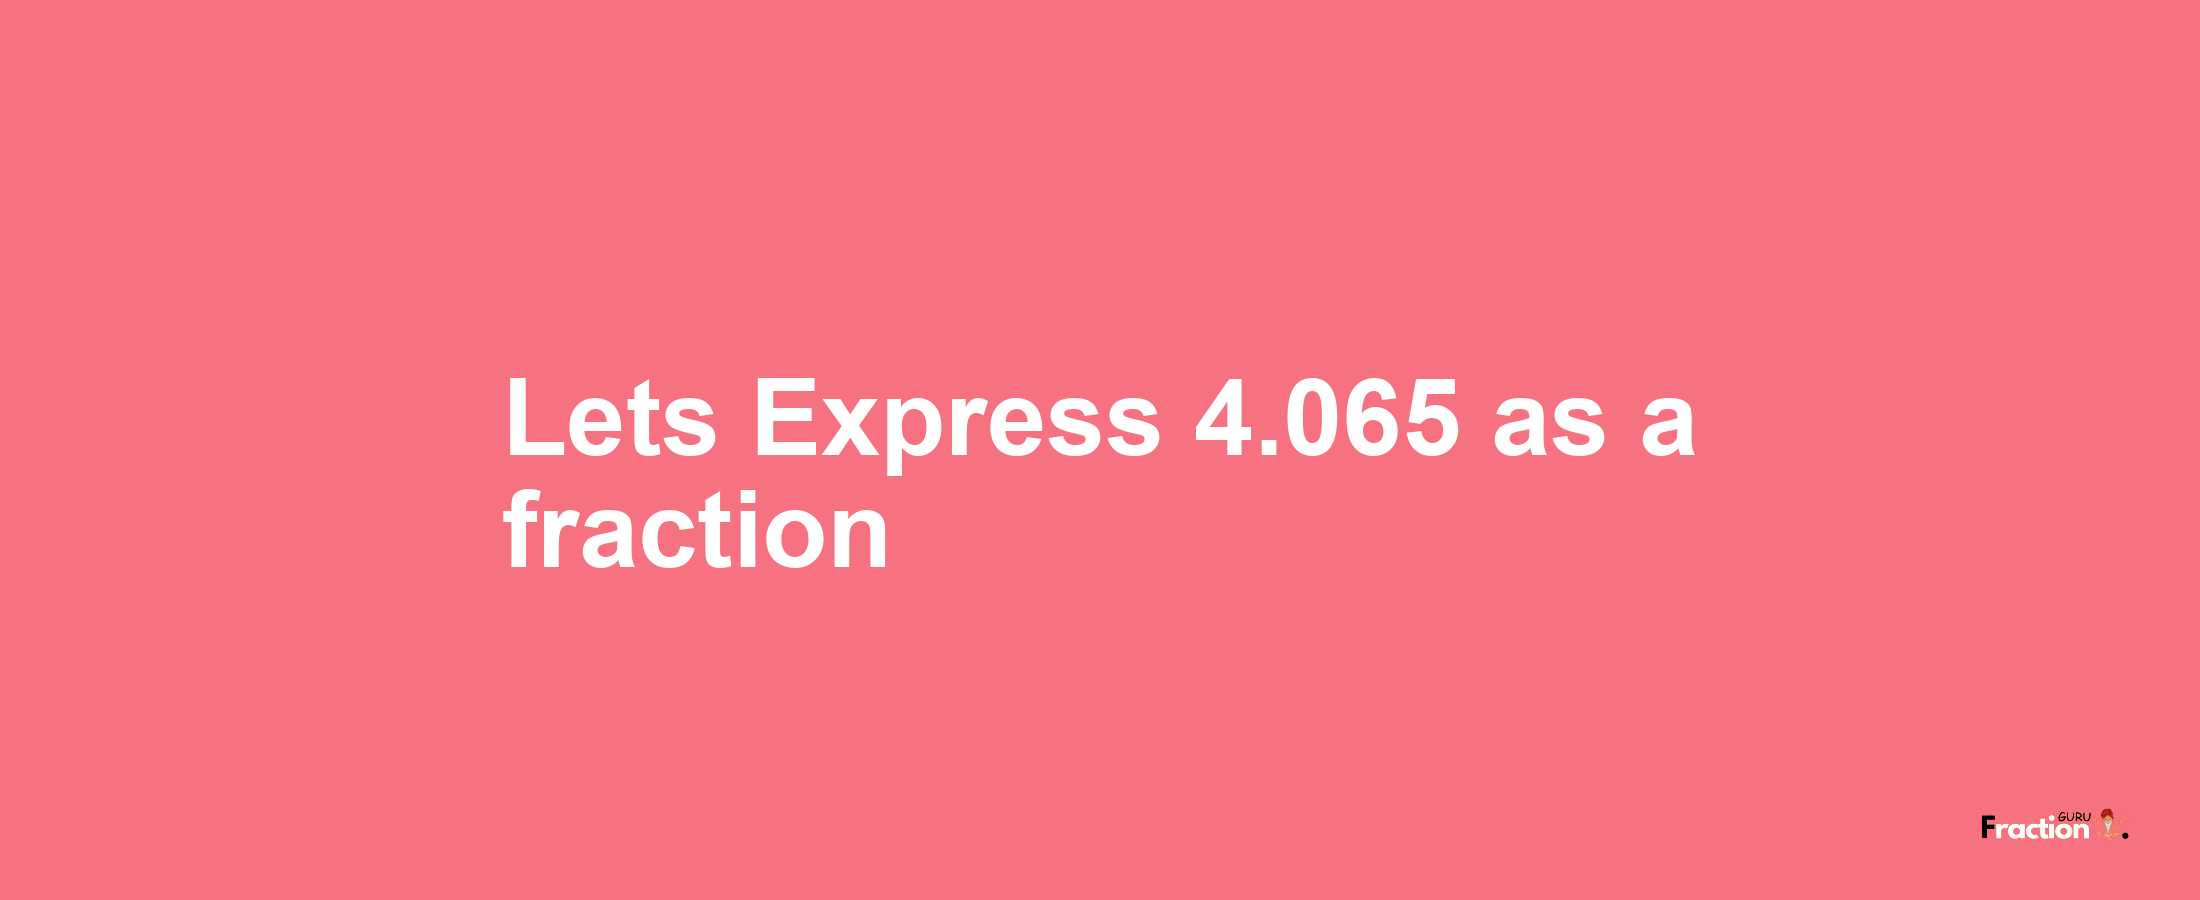 Lets Express 4.065 as afraction